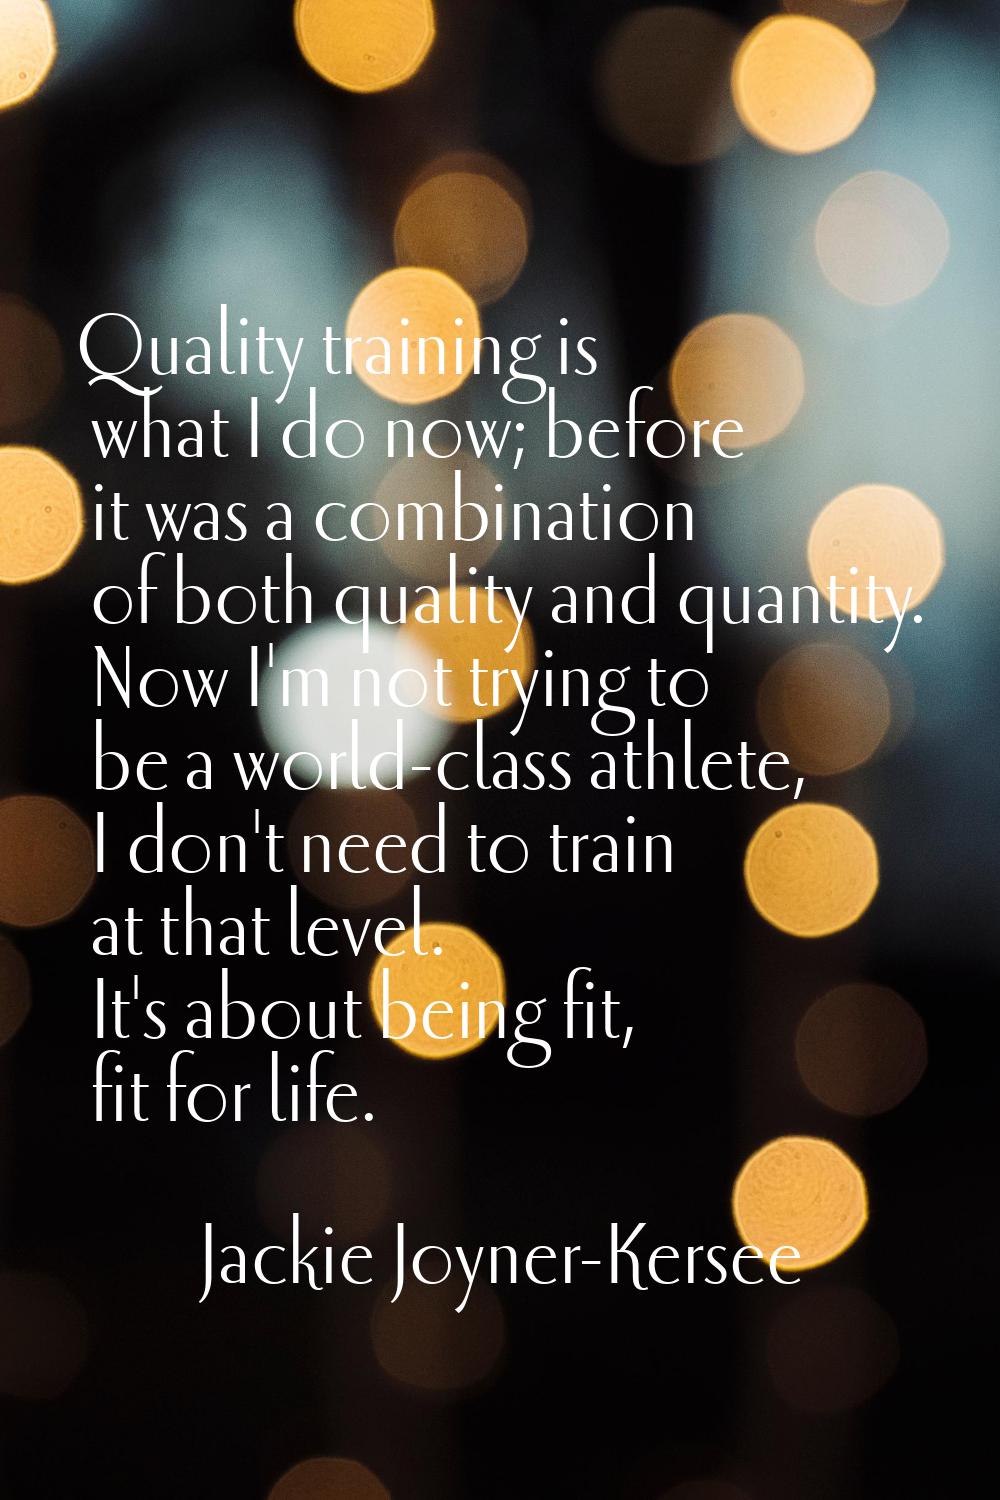 Quality training is what I do now; before it was a combination of both quality and quantity. Now I'